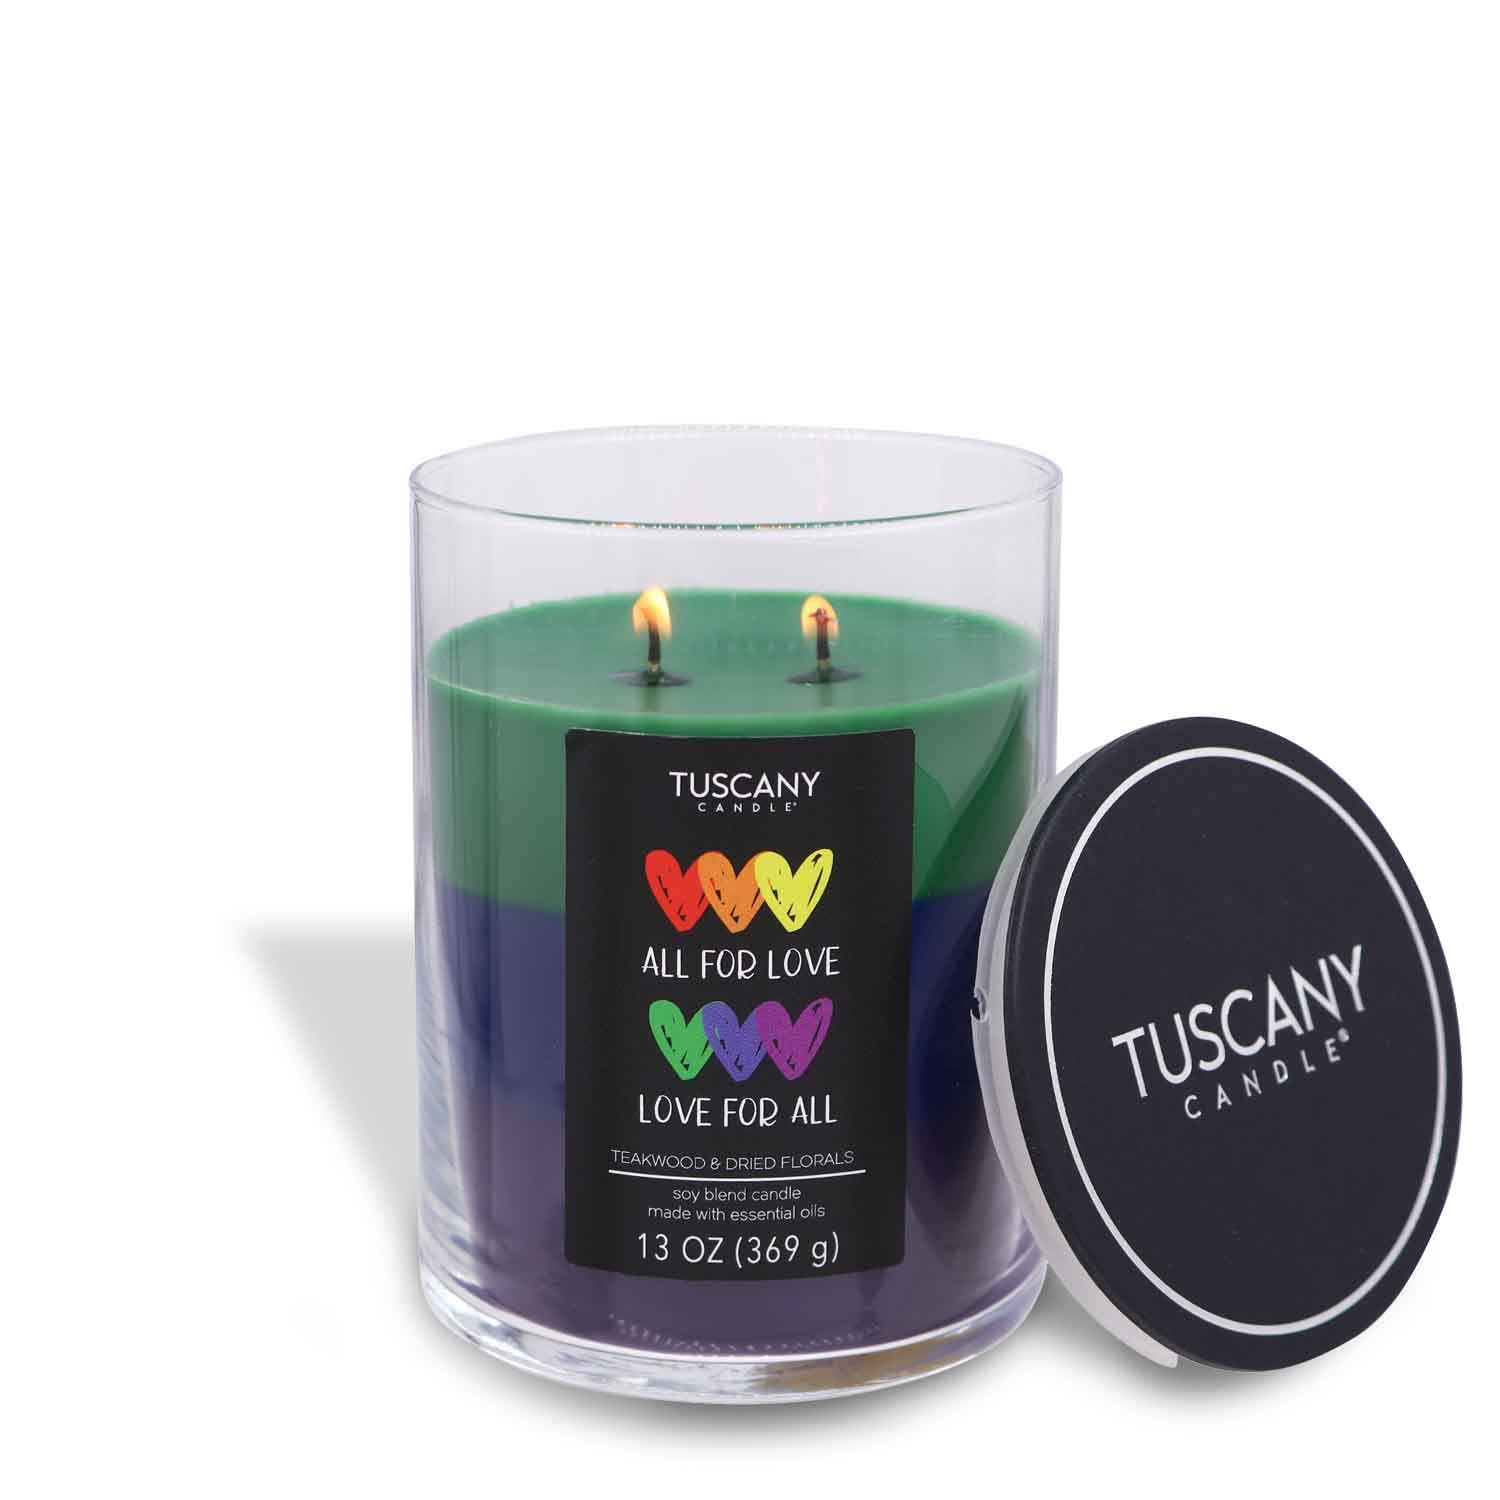 The All For Love Scented Jar Candle (13 oz) – Pride Collection from Tuscany Candle® SEASONAL is a true fragrance centerpiece.